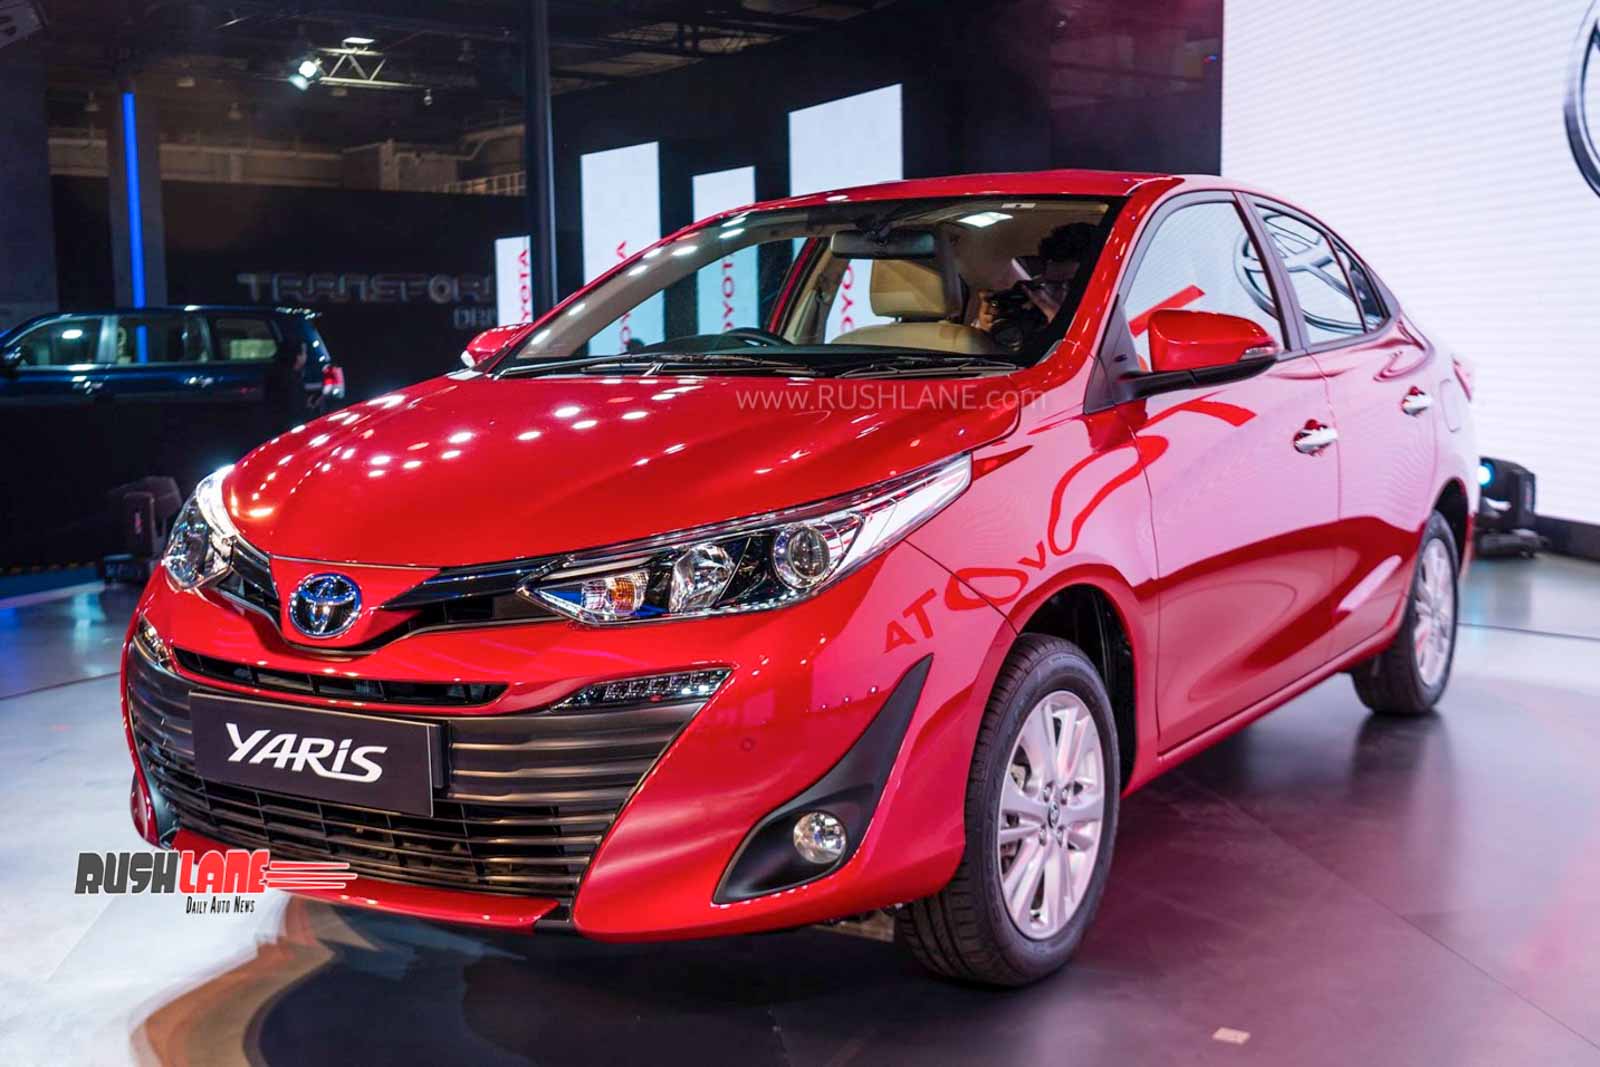 Toyota New Models 2020 In India